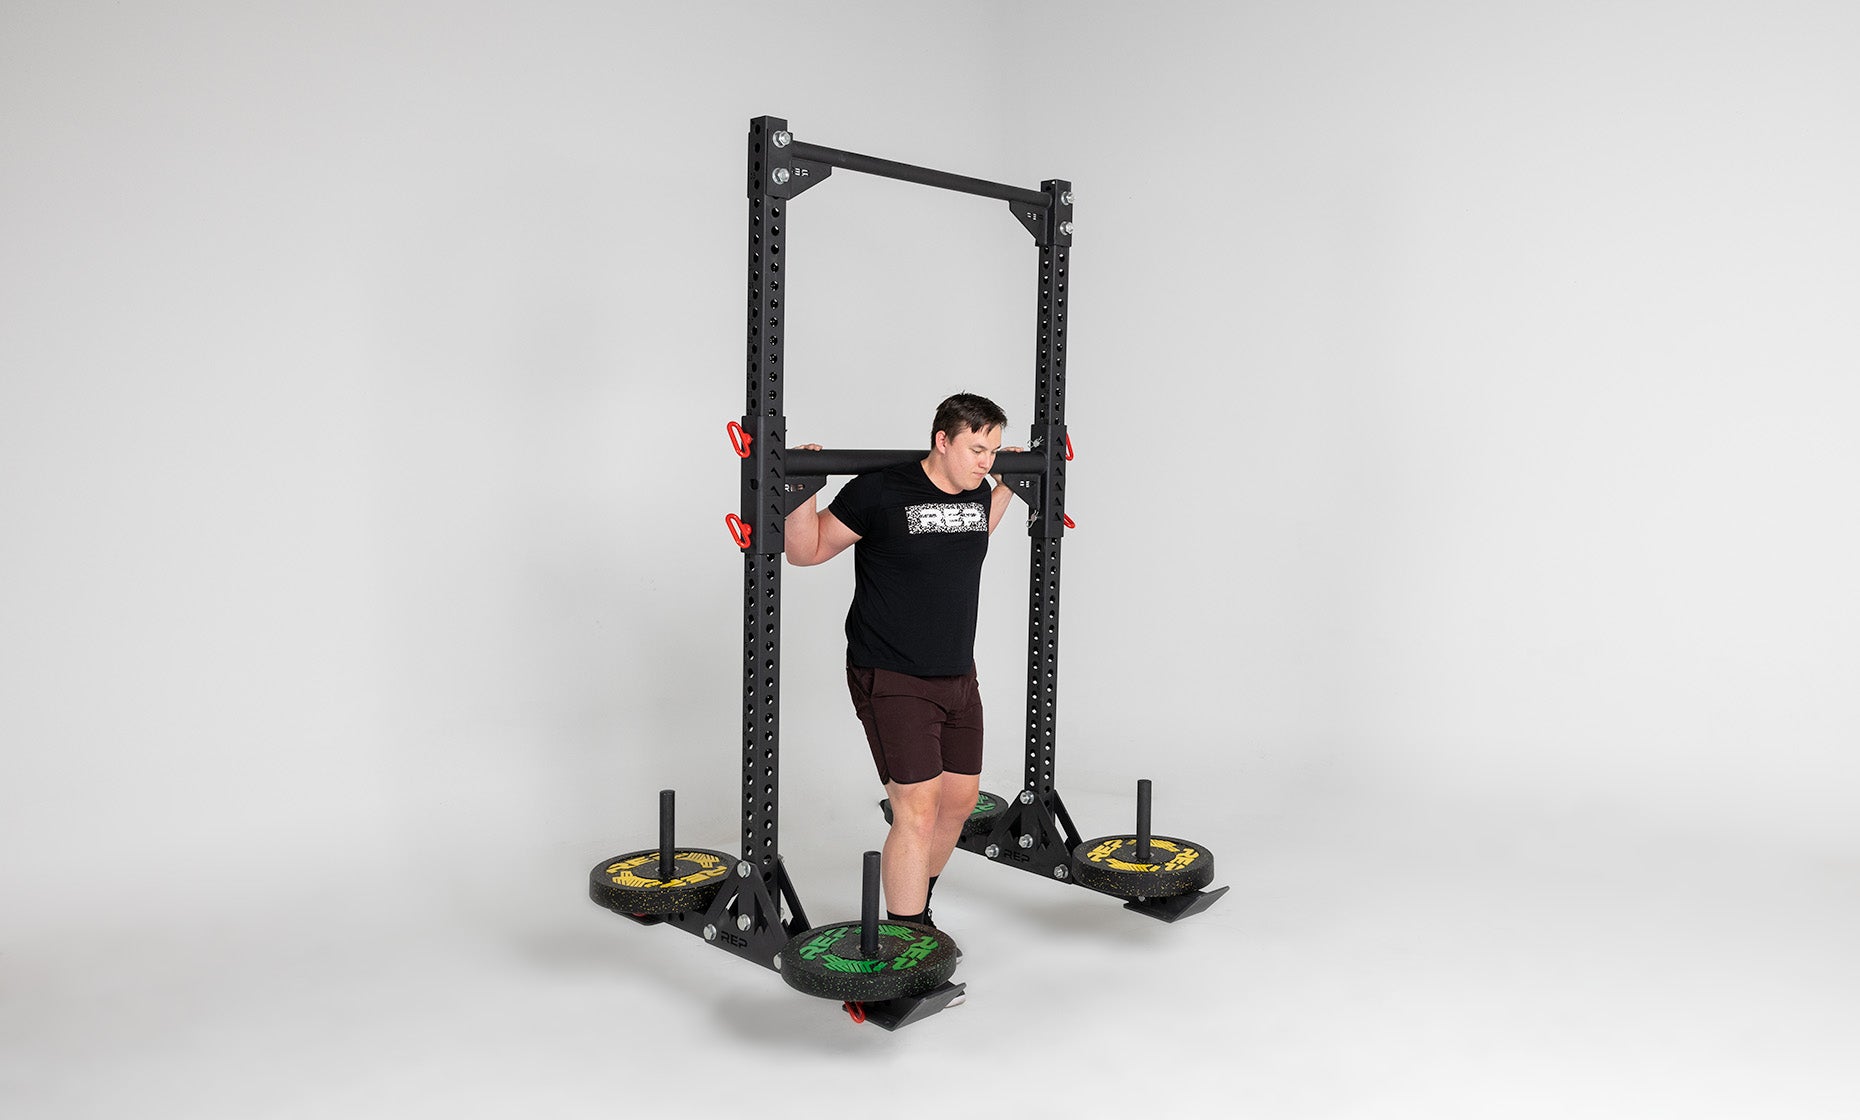 Oxylus Yoke With Pull-Up Bar Being Used For Heavy a Carry With Weight On All Four Weight Horns